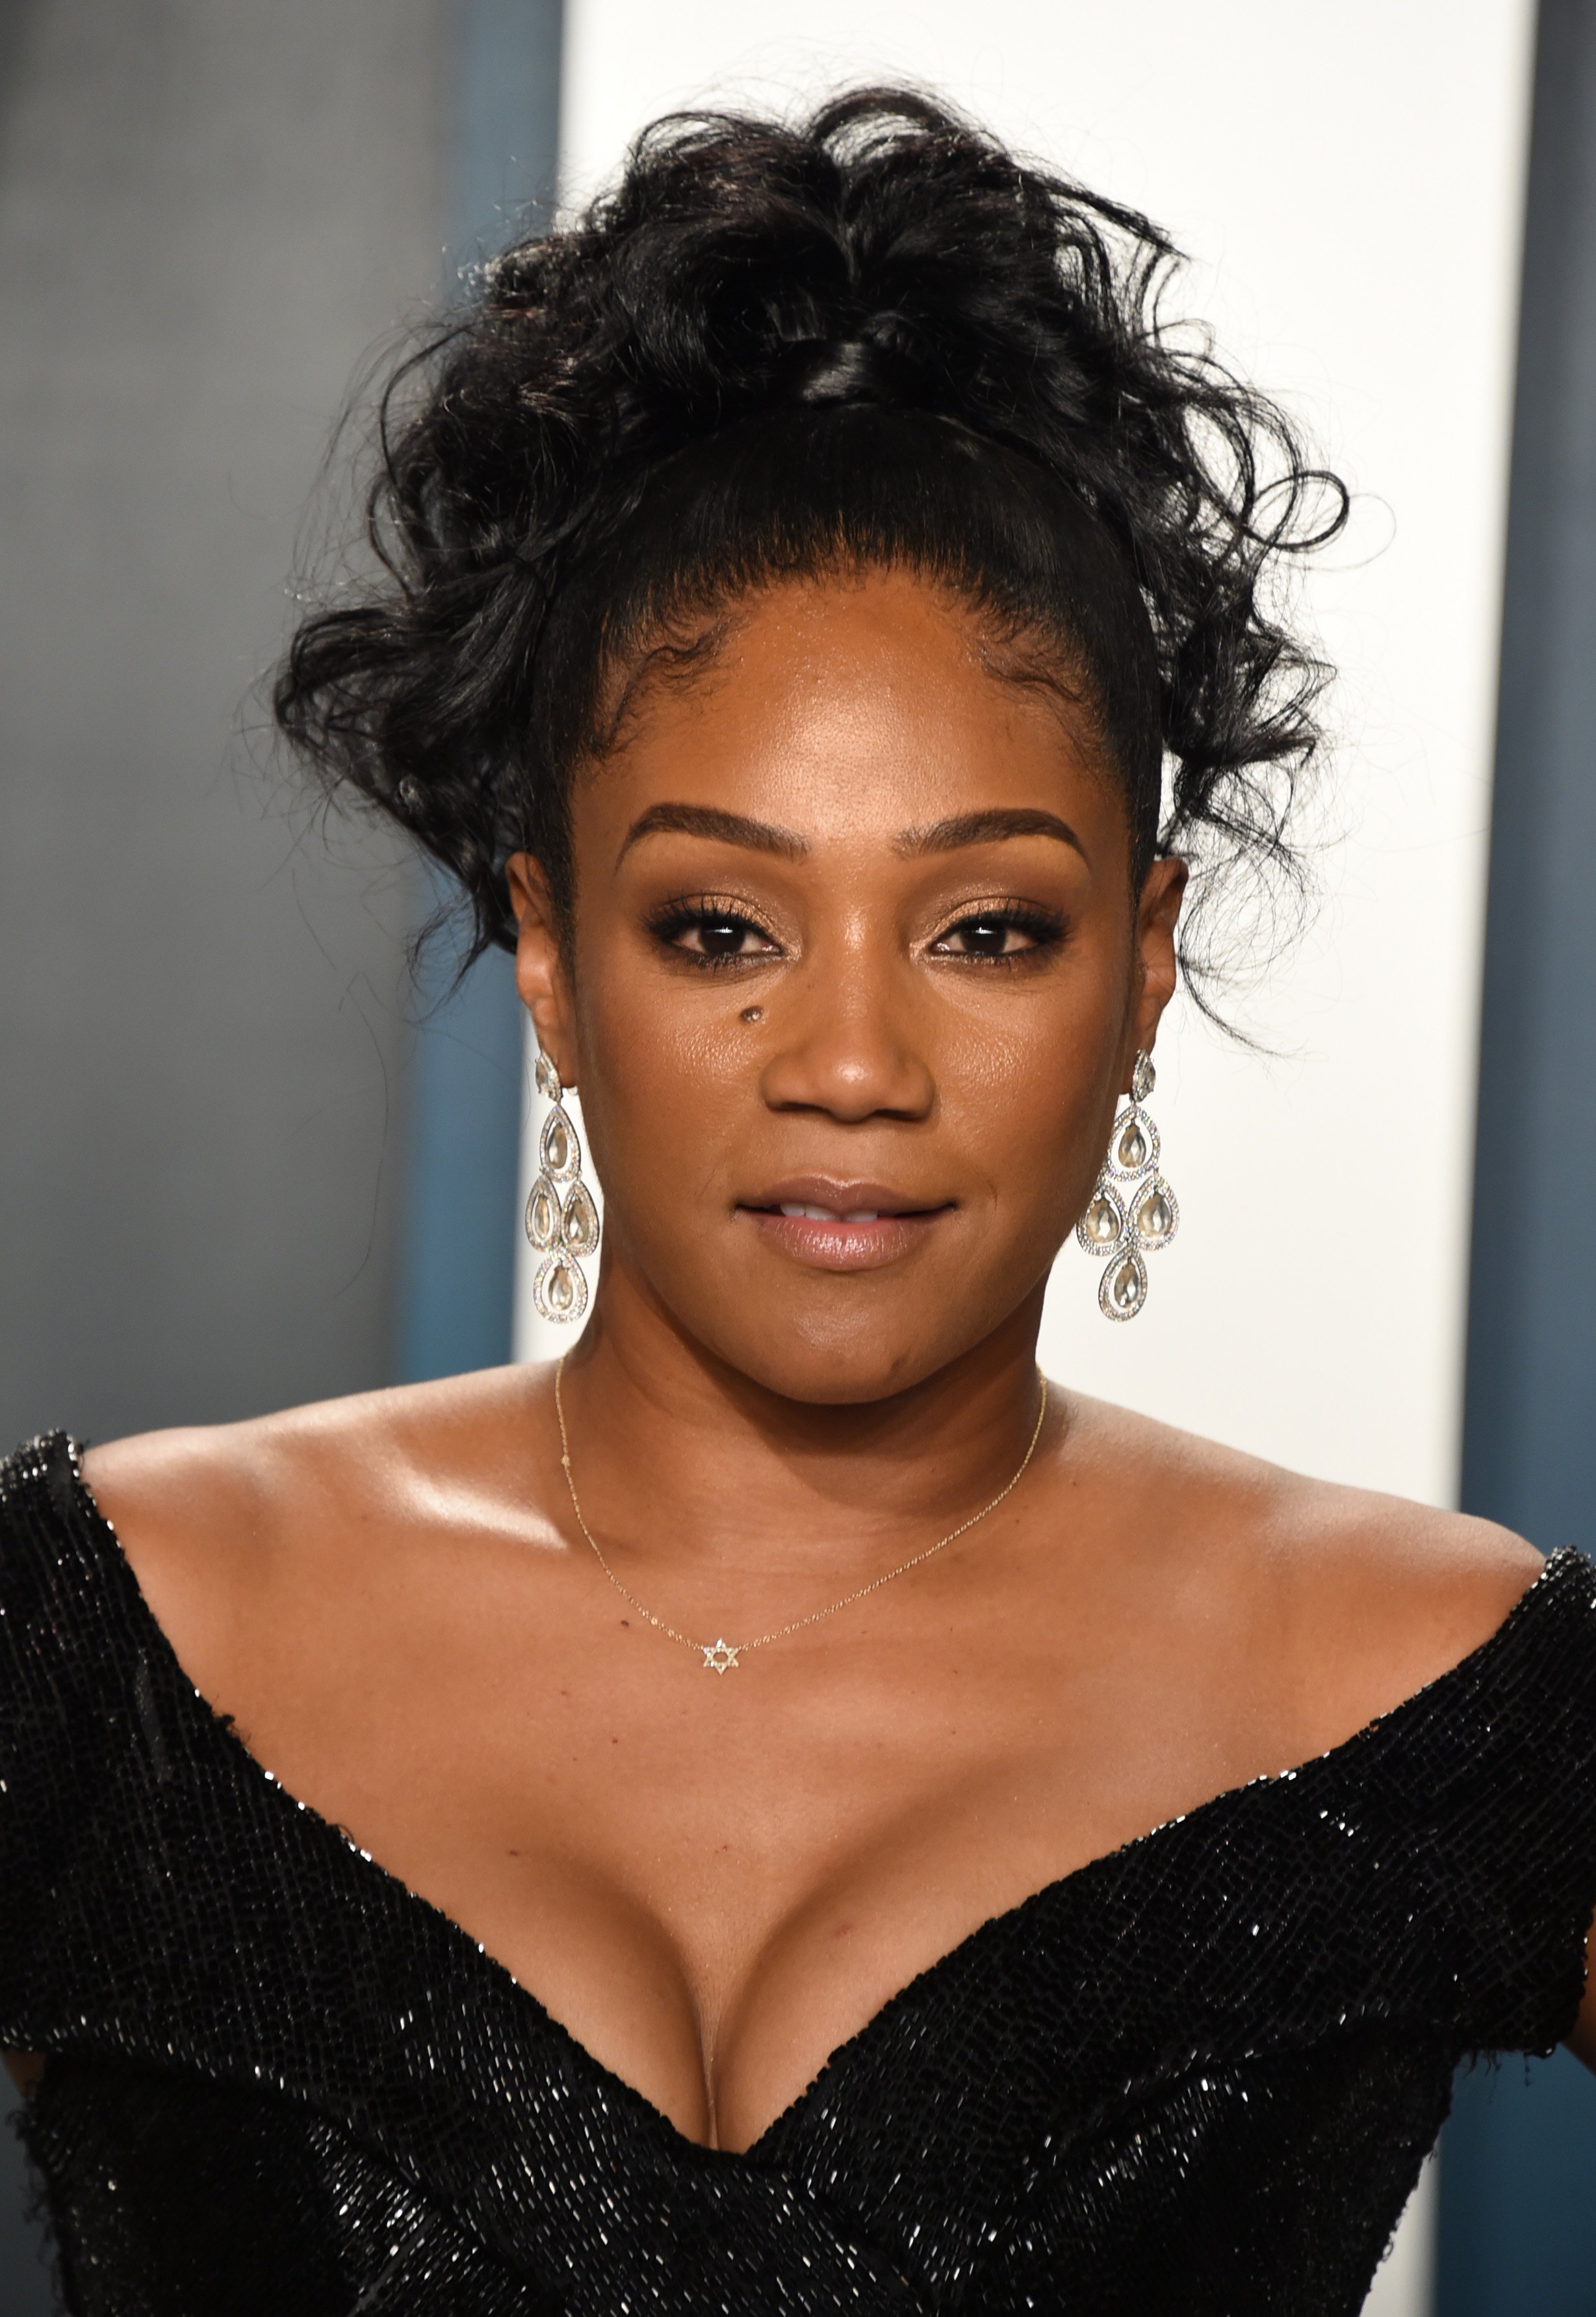 Tiffany Haddish attends the 2020 Vanity Fair Oscar Party at Wallis Annenberg Center for the Performing Arts on February 09, 2020 in Beverly Hills, California | Source: Getty Images